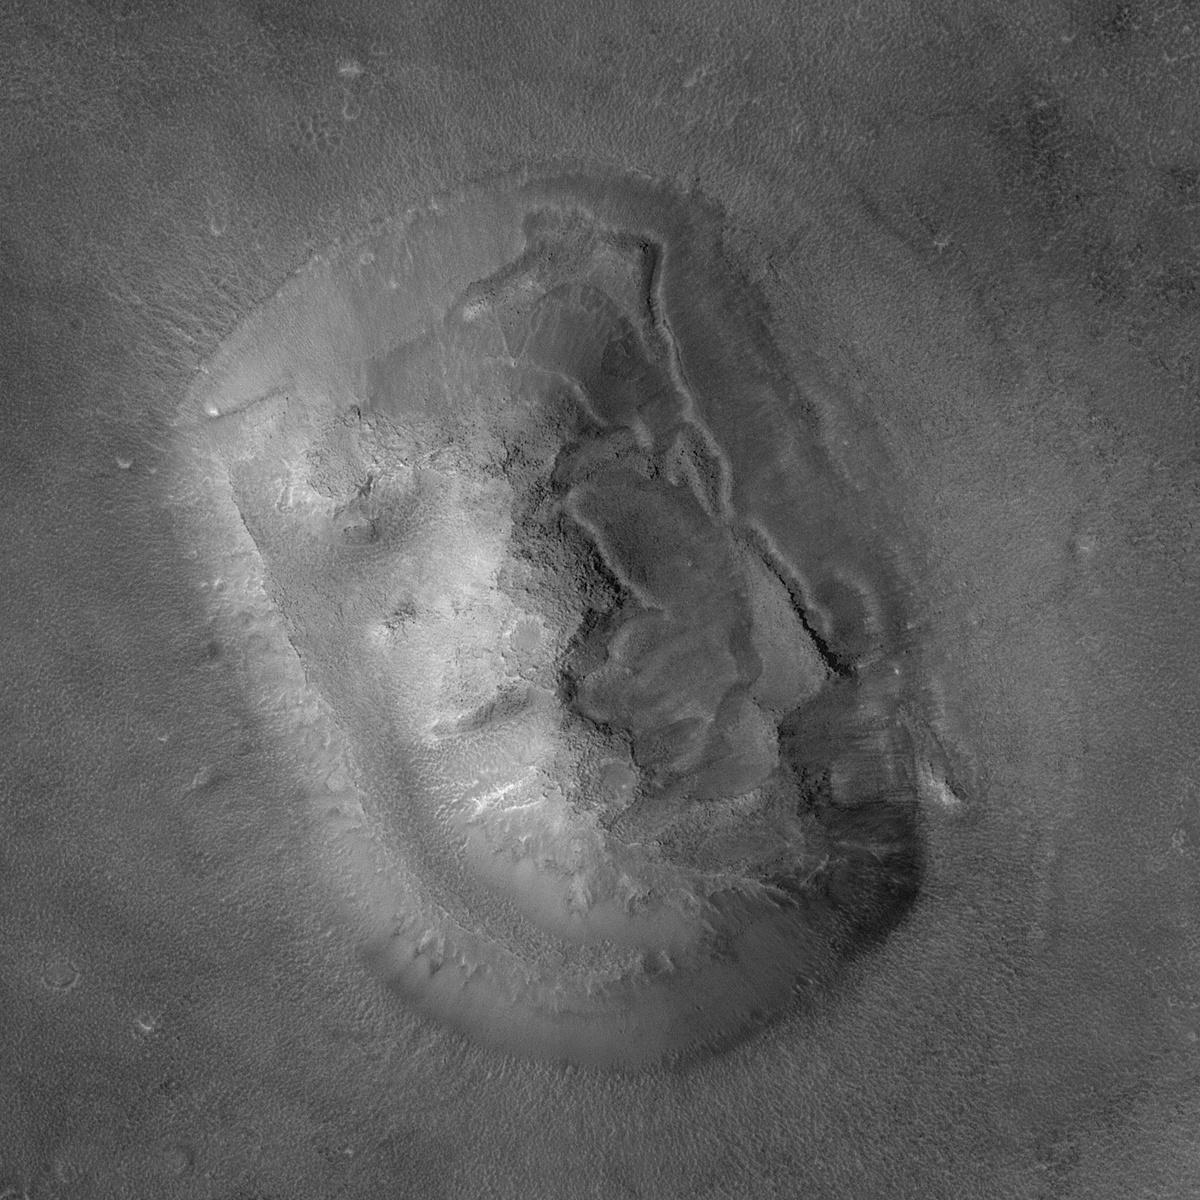 Close-up of the Face on Mars